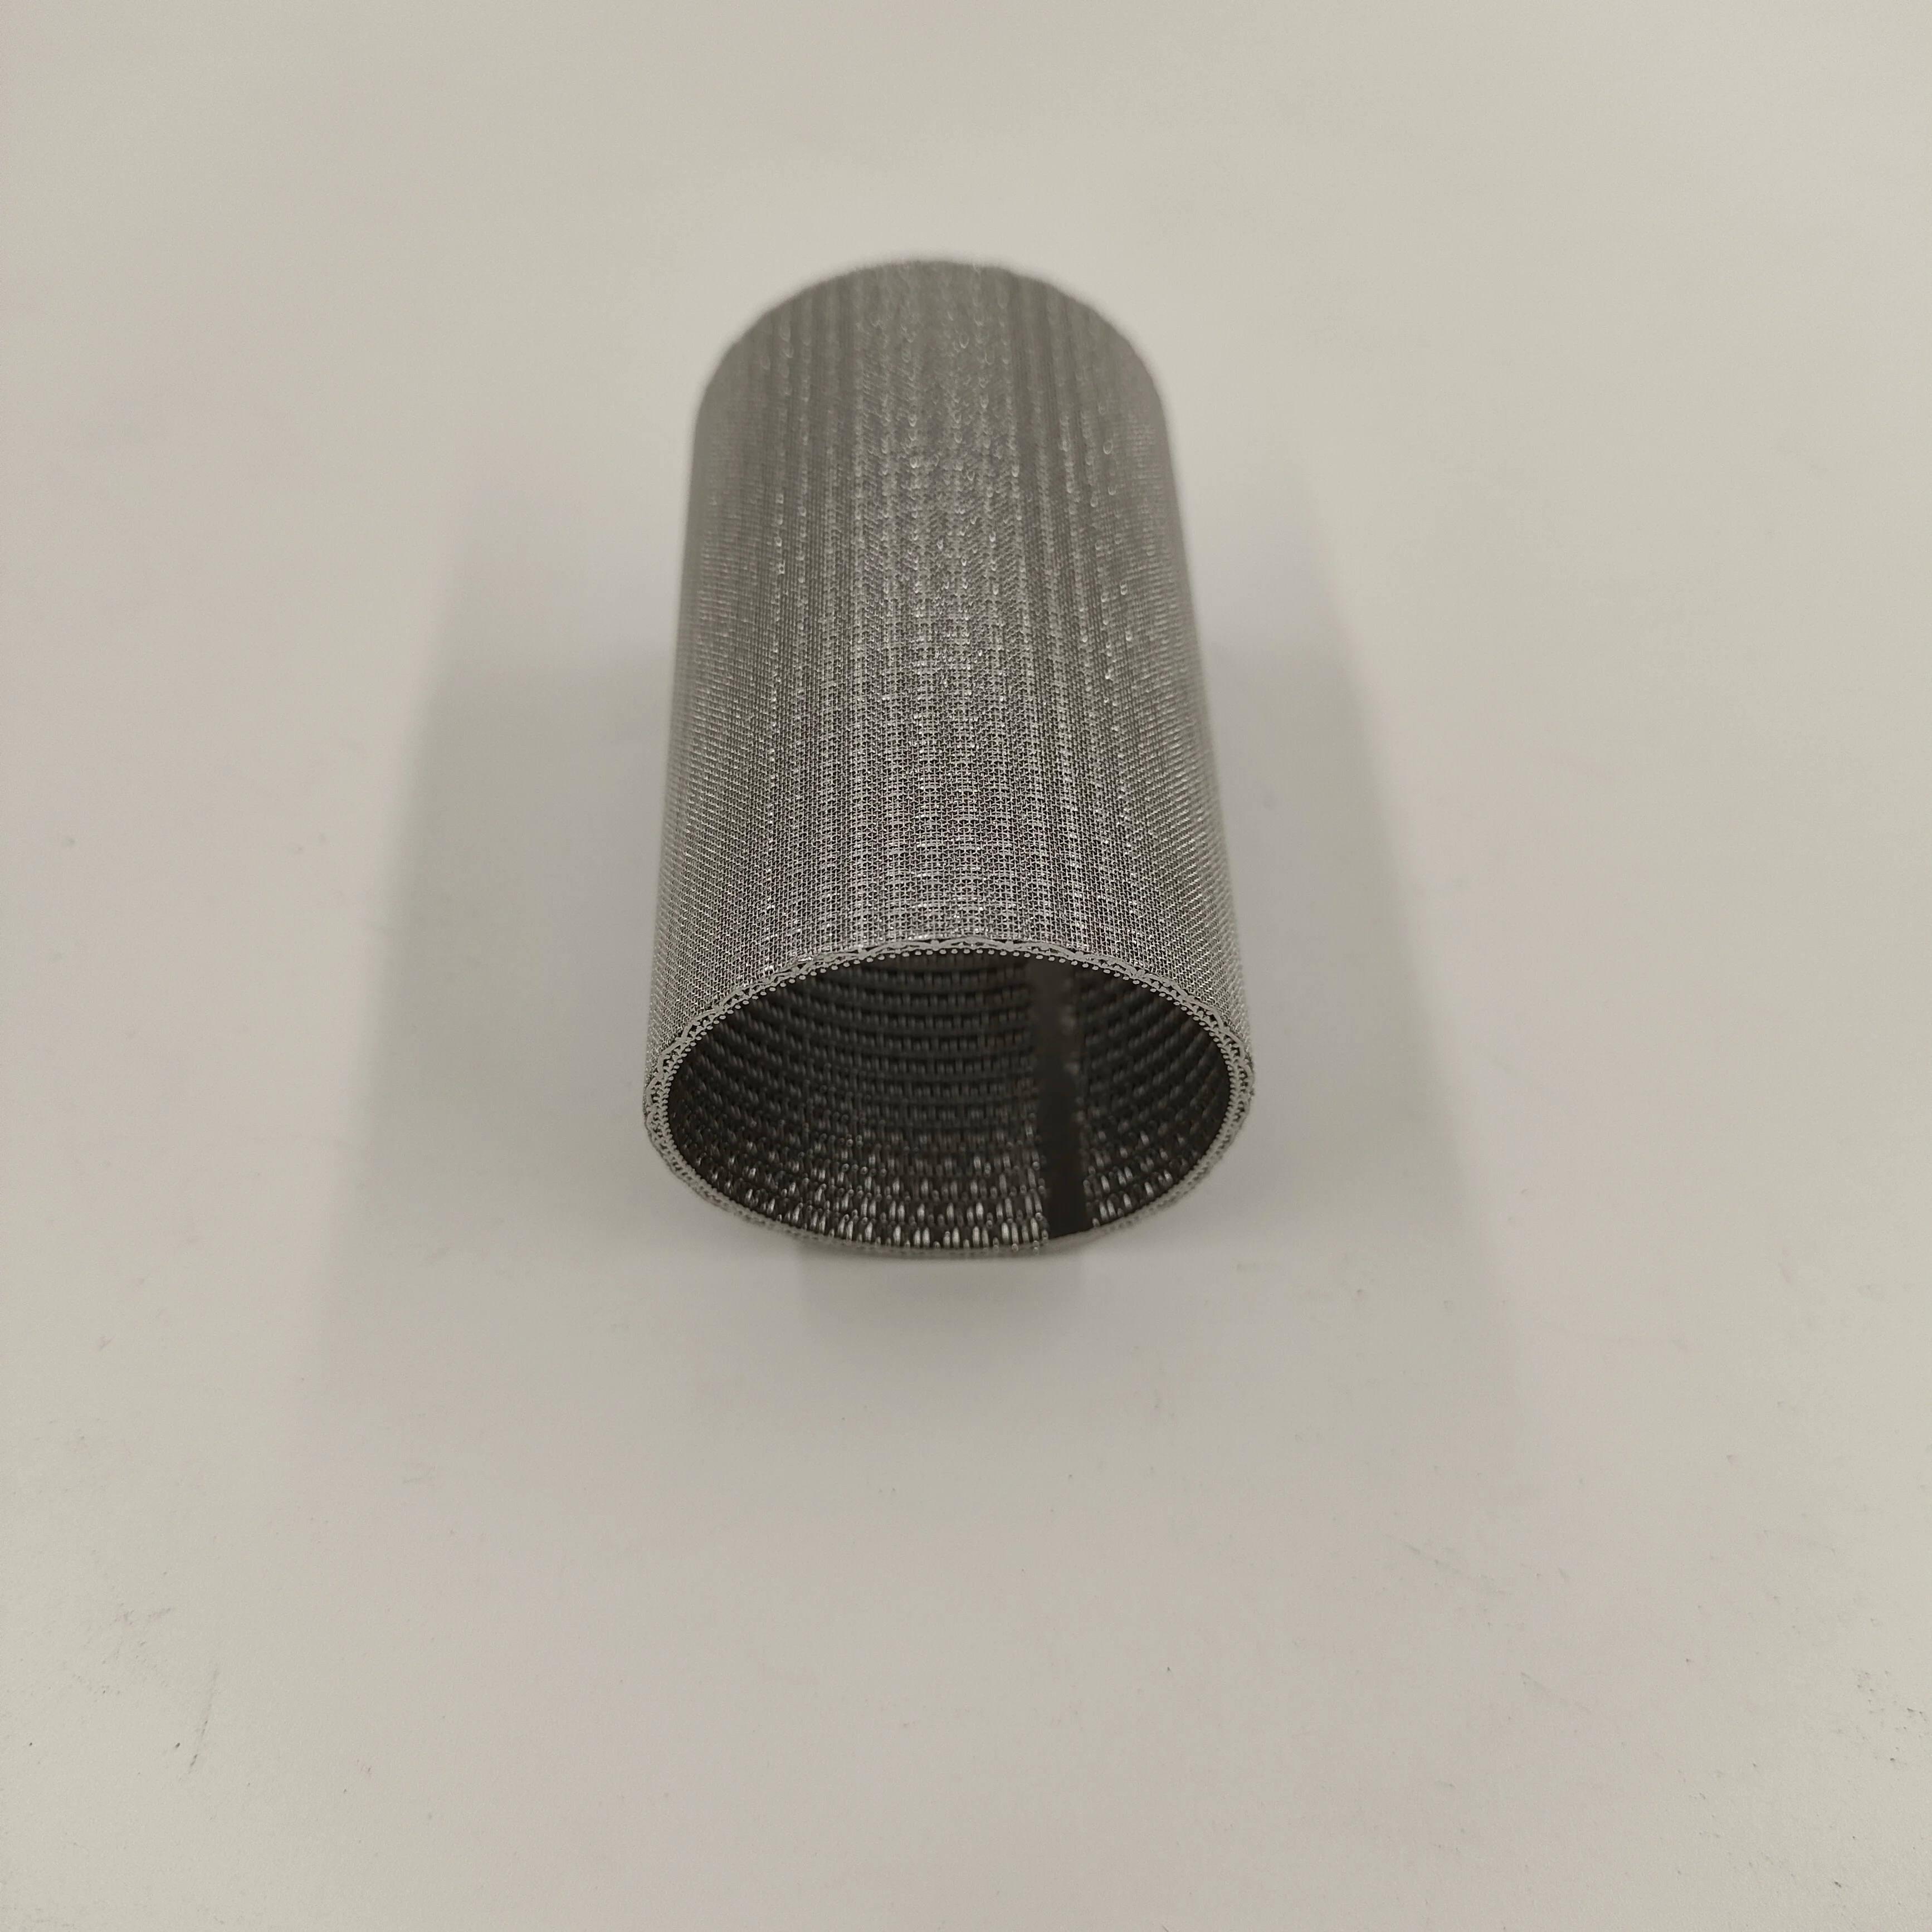 Backwash 10/20/40/50/80/125 Micron Stainless Steel Sintered mesh filter element for industrial oil pre water filter treatment